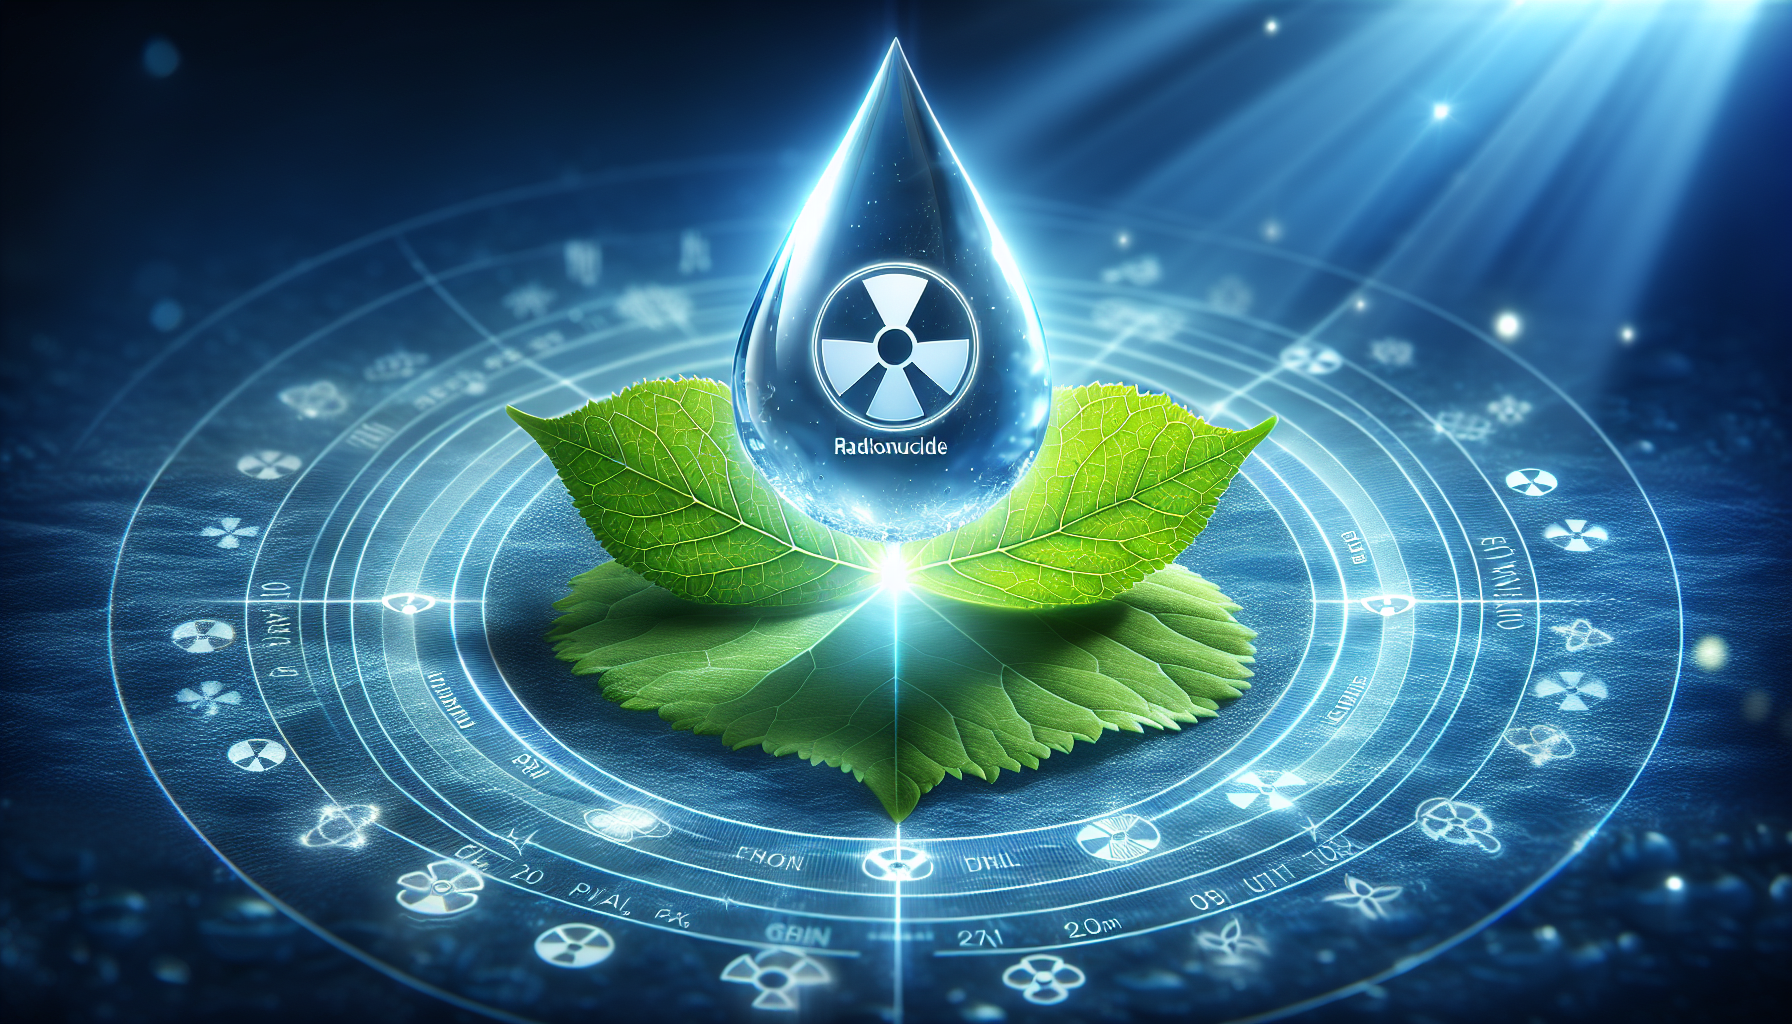 How Can I Eliminate Well Water Contamination By Radionuclides?